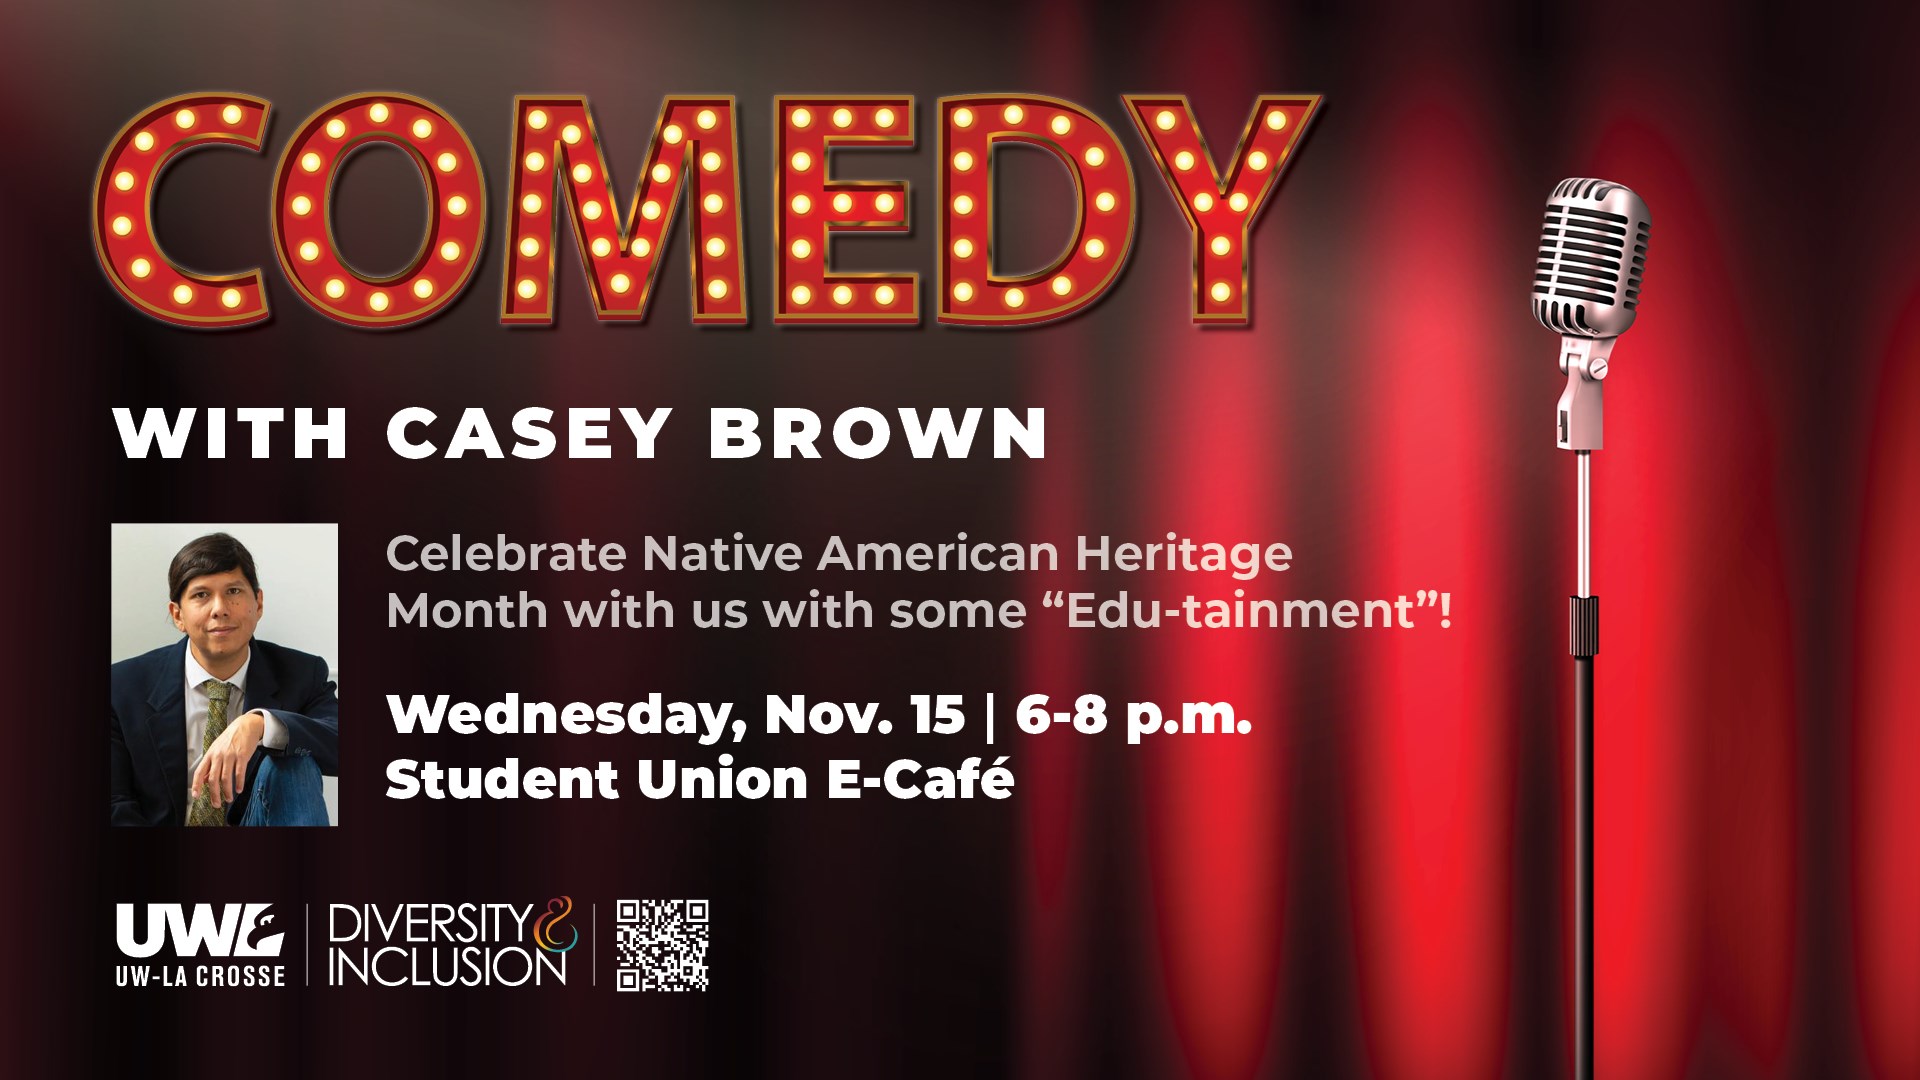 Event image for Comedy night with Emmy Award winning Casey Brown